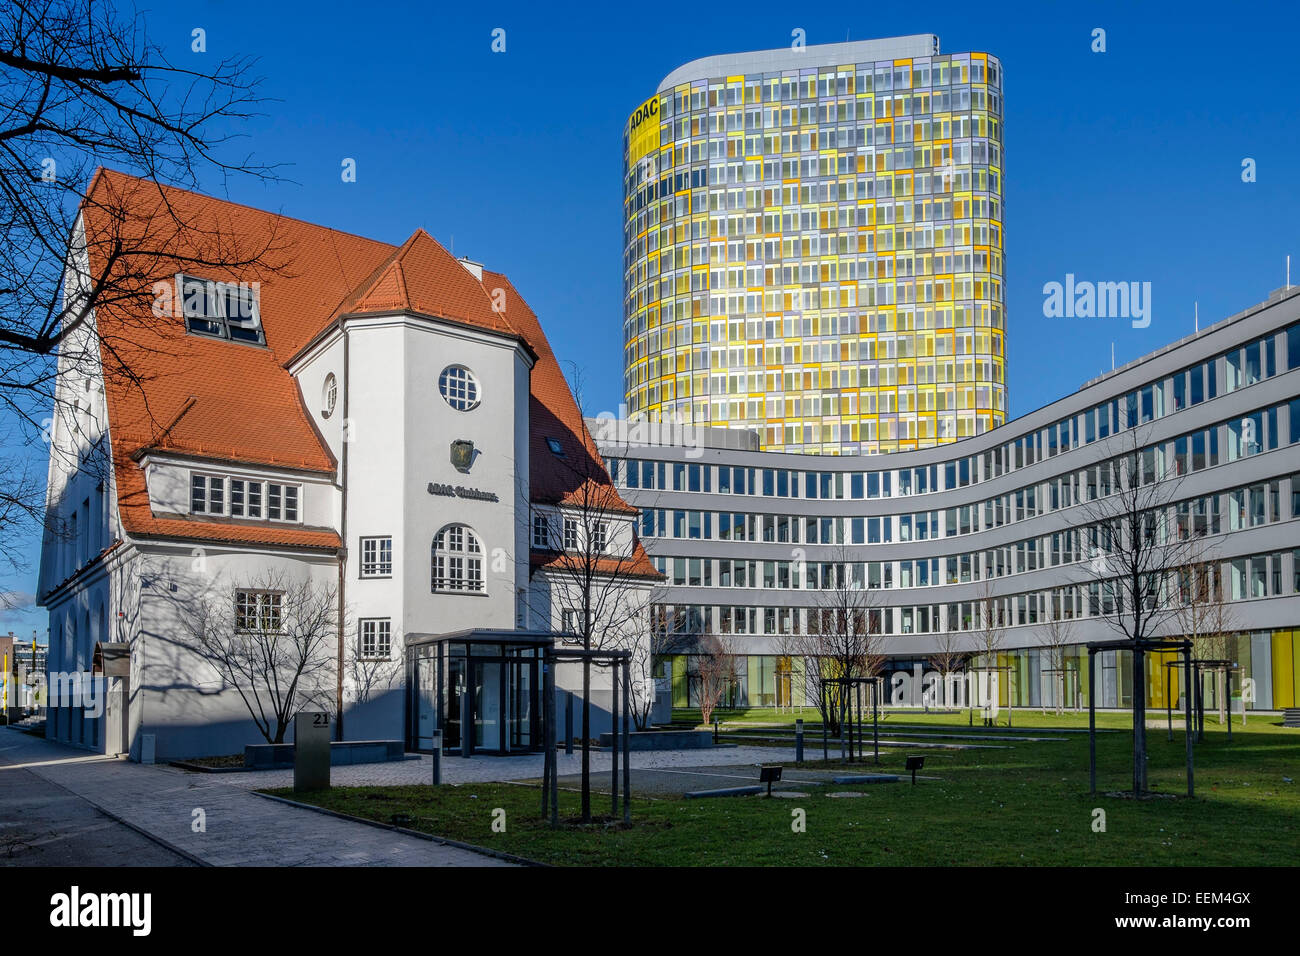 Old Club building and headquarters of the ADAC, General German Automobile Club, architects Sauerbruch Hutton, Munich Stock Photo